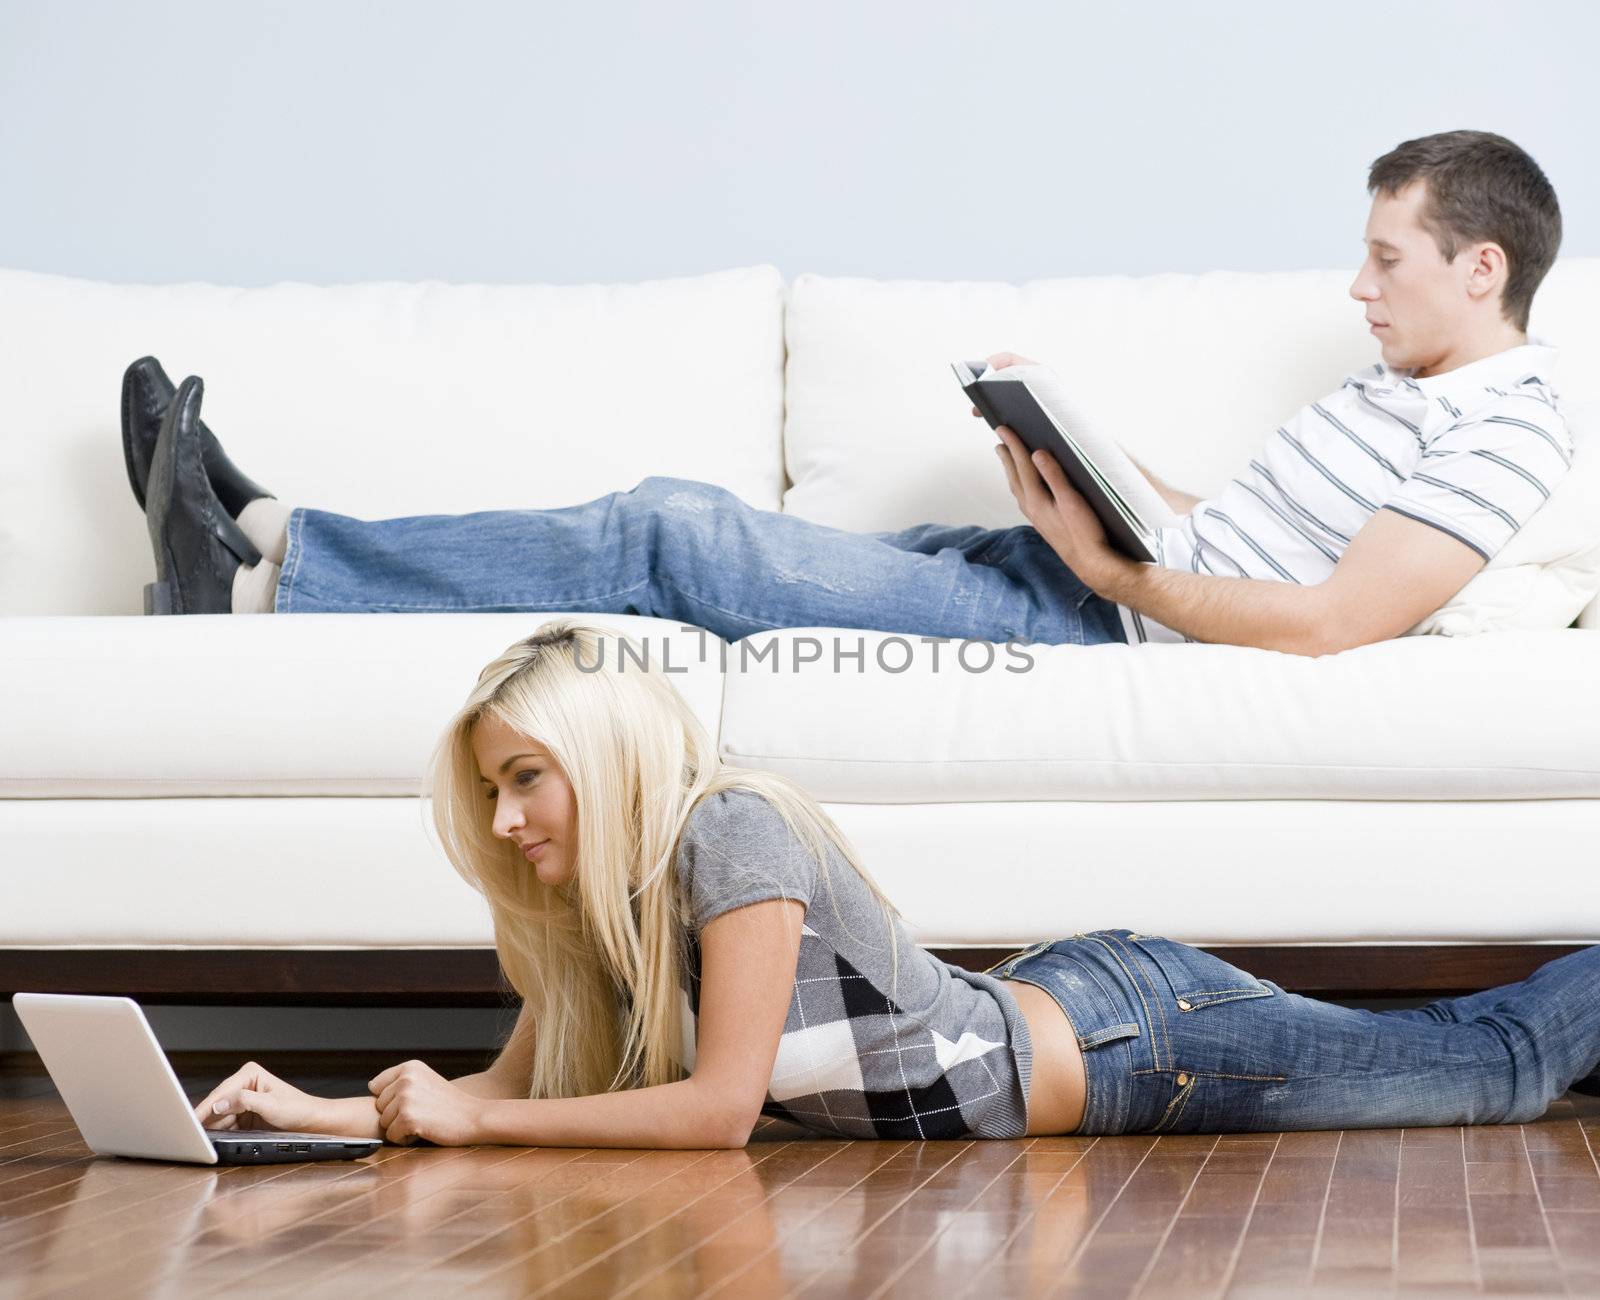 Man reads on a couch while woman stretches out on the floor with her laptop. Horizontal format.